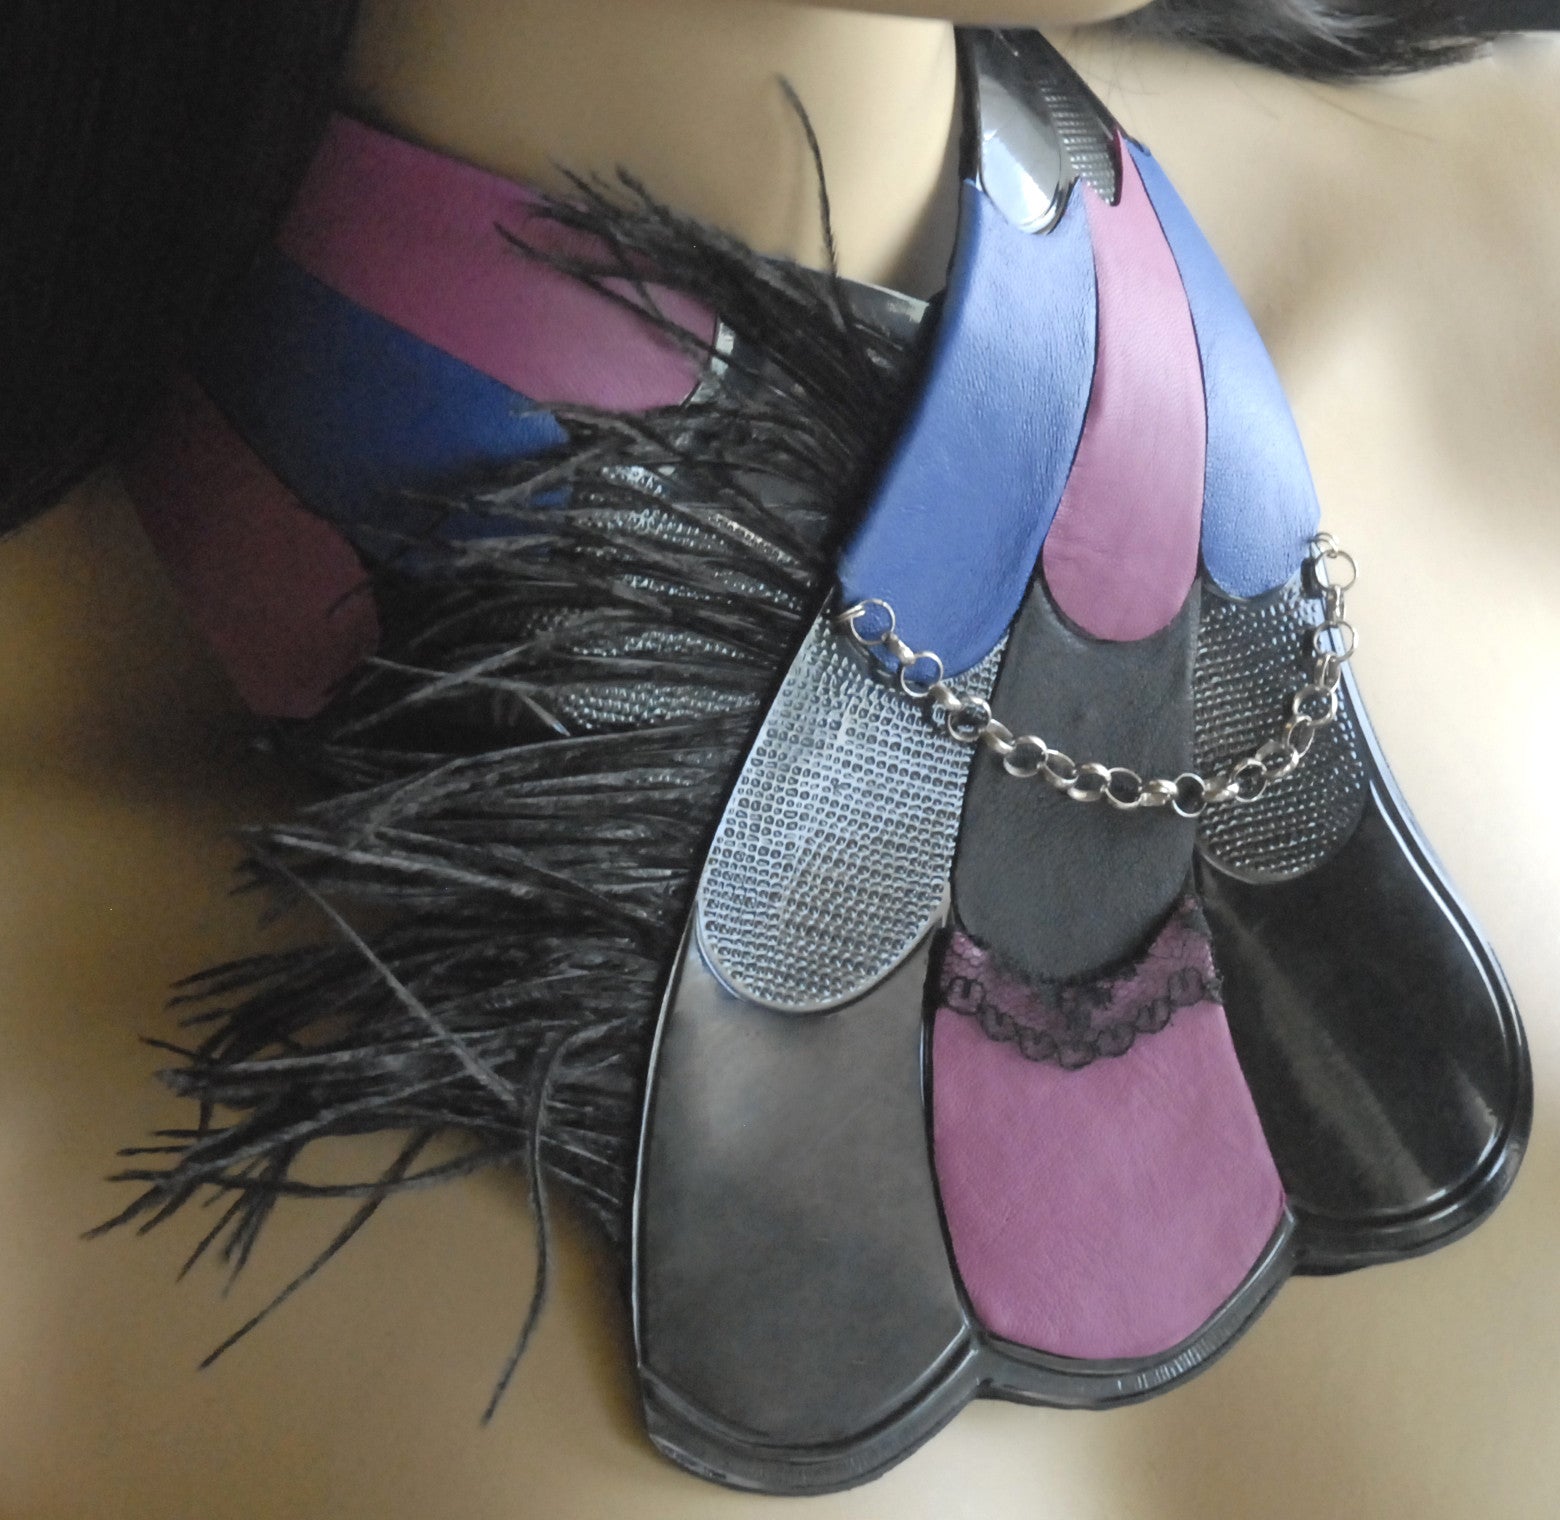 Wings necklace pink, blue and black